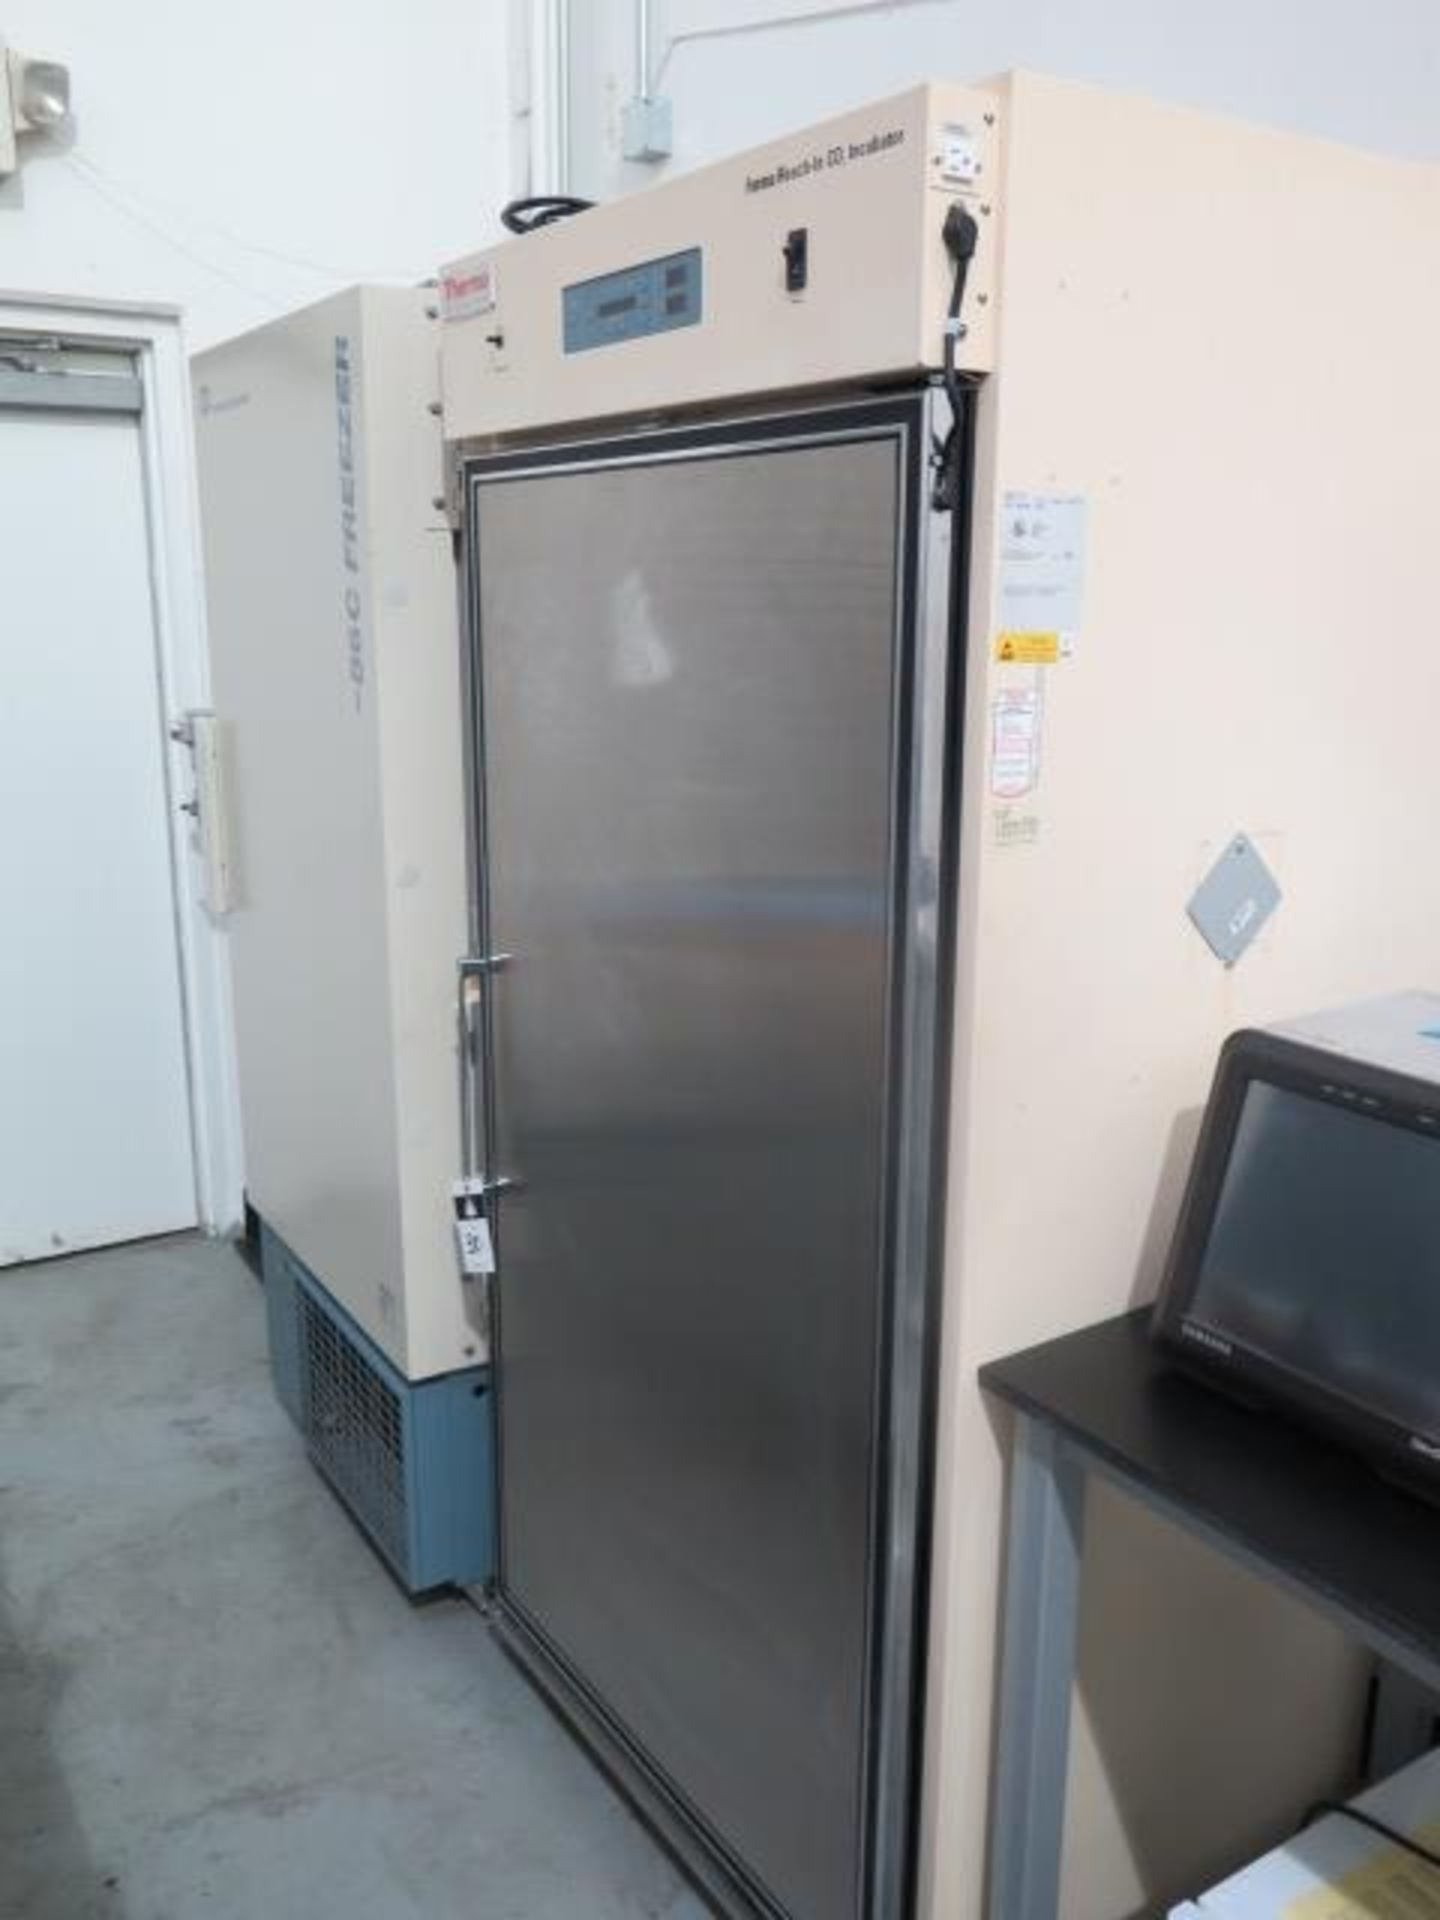 Thermo Scientific mdl. 3950 Forma Reach-In CO2 Incubator s/n 309842-1827 (SOLD AS-IS - NO WARRANTY) - Image 2 of 8